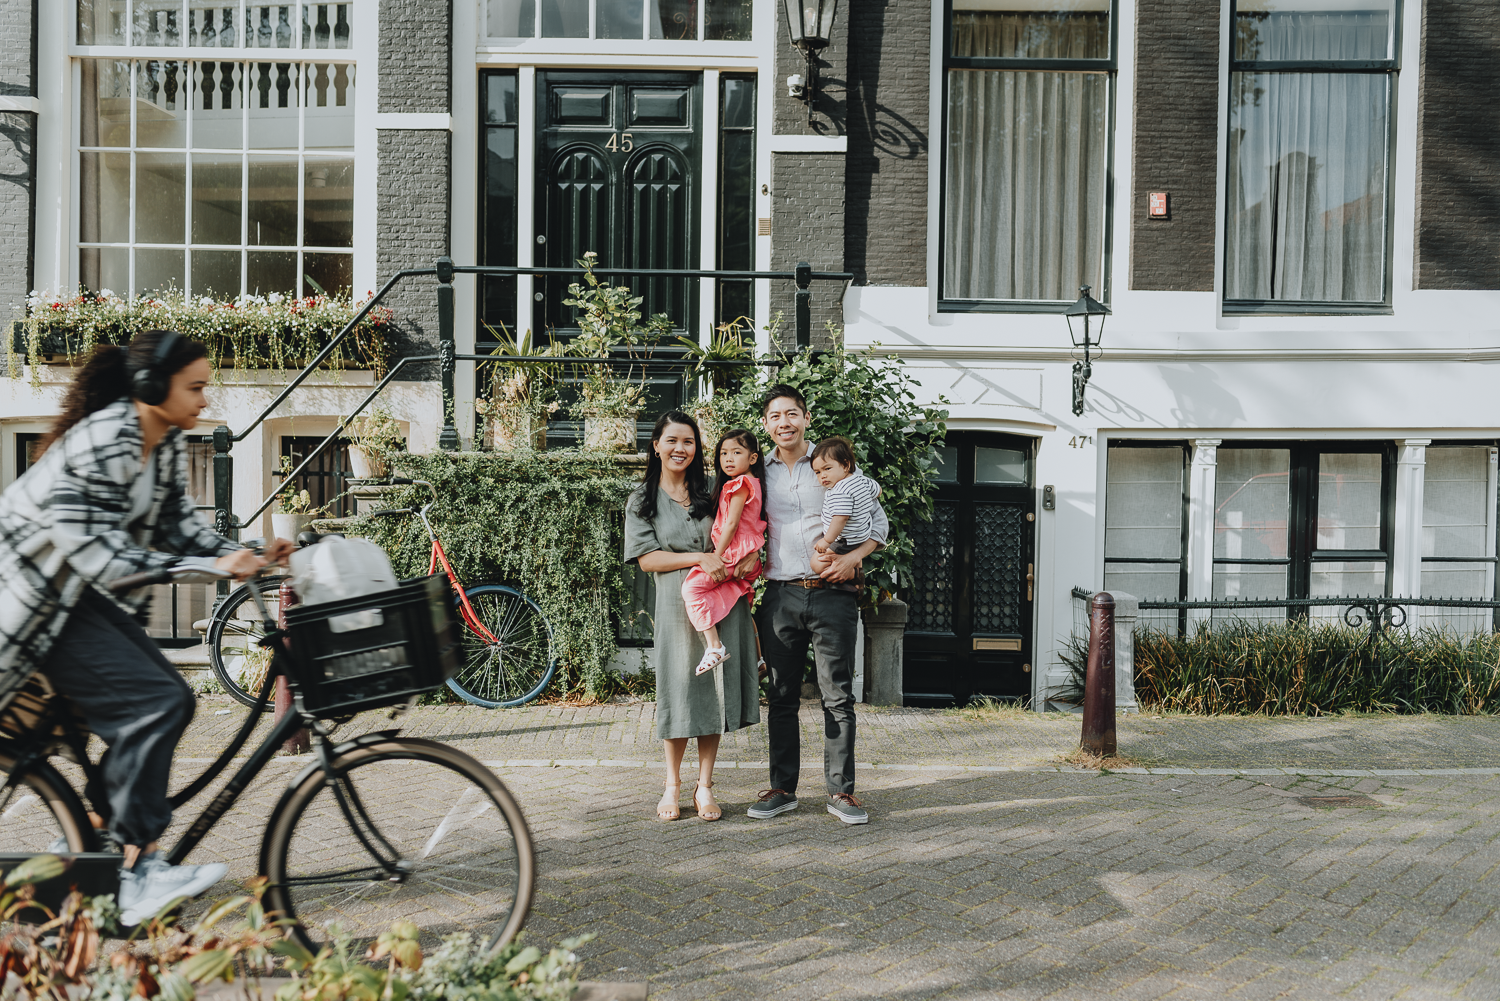 Family and bicycle in Amsterdam